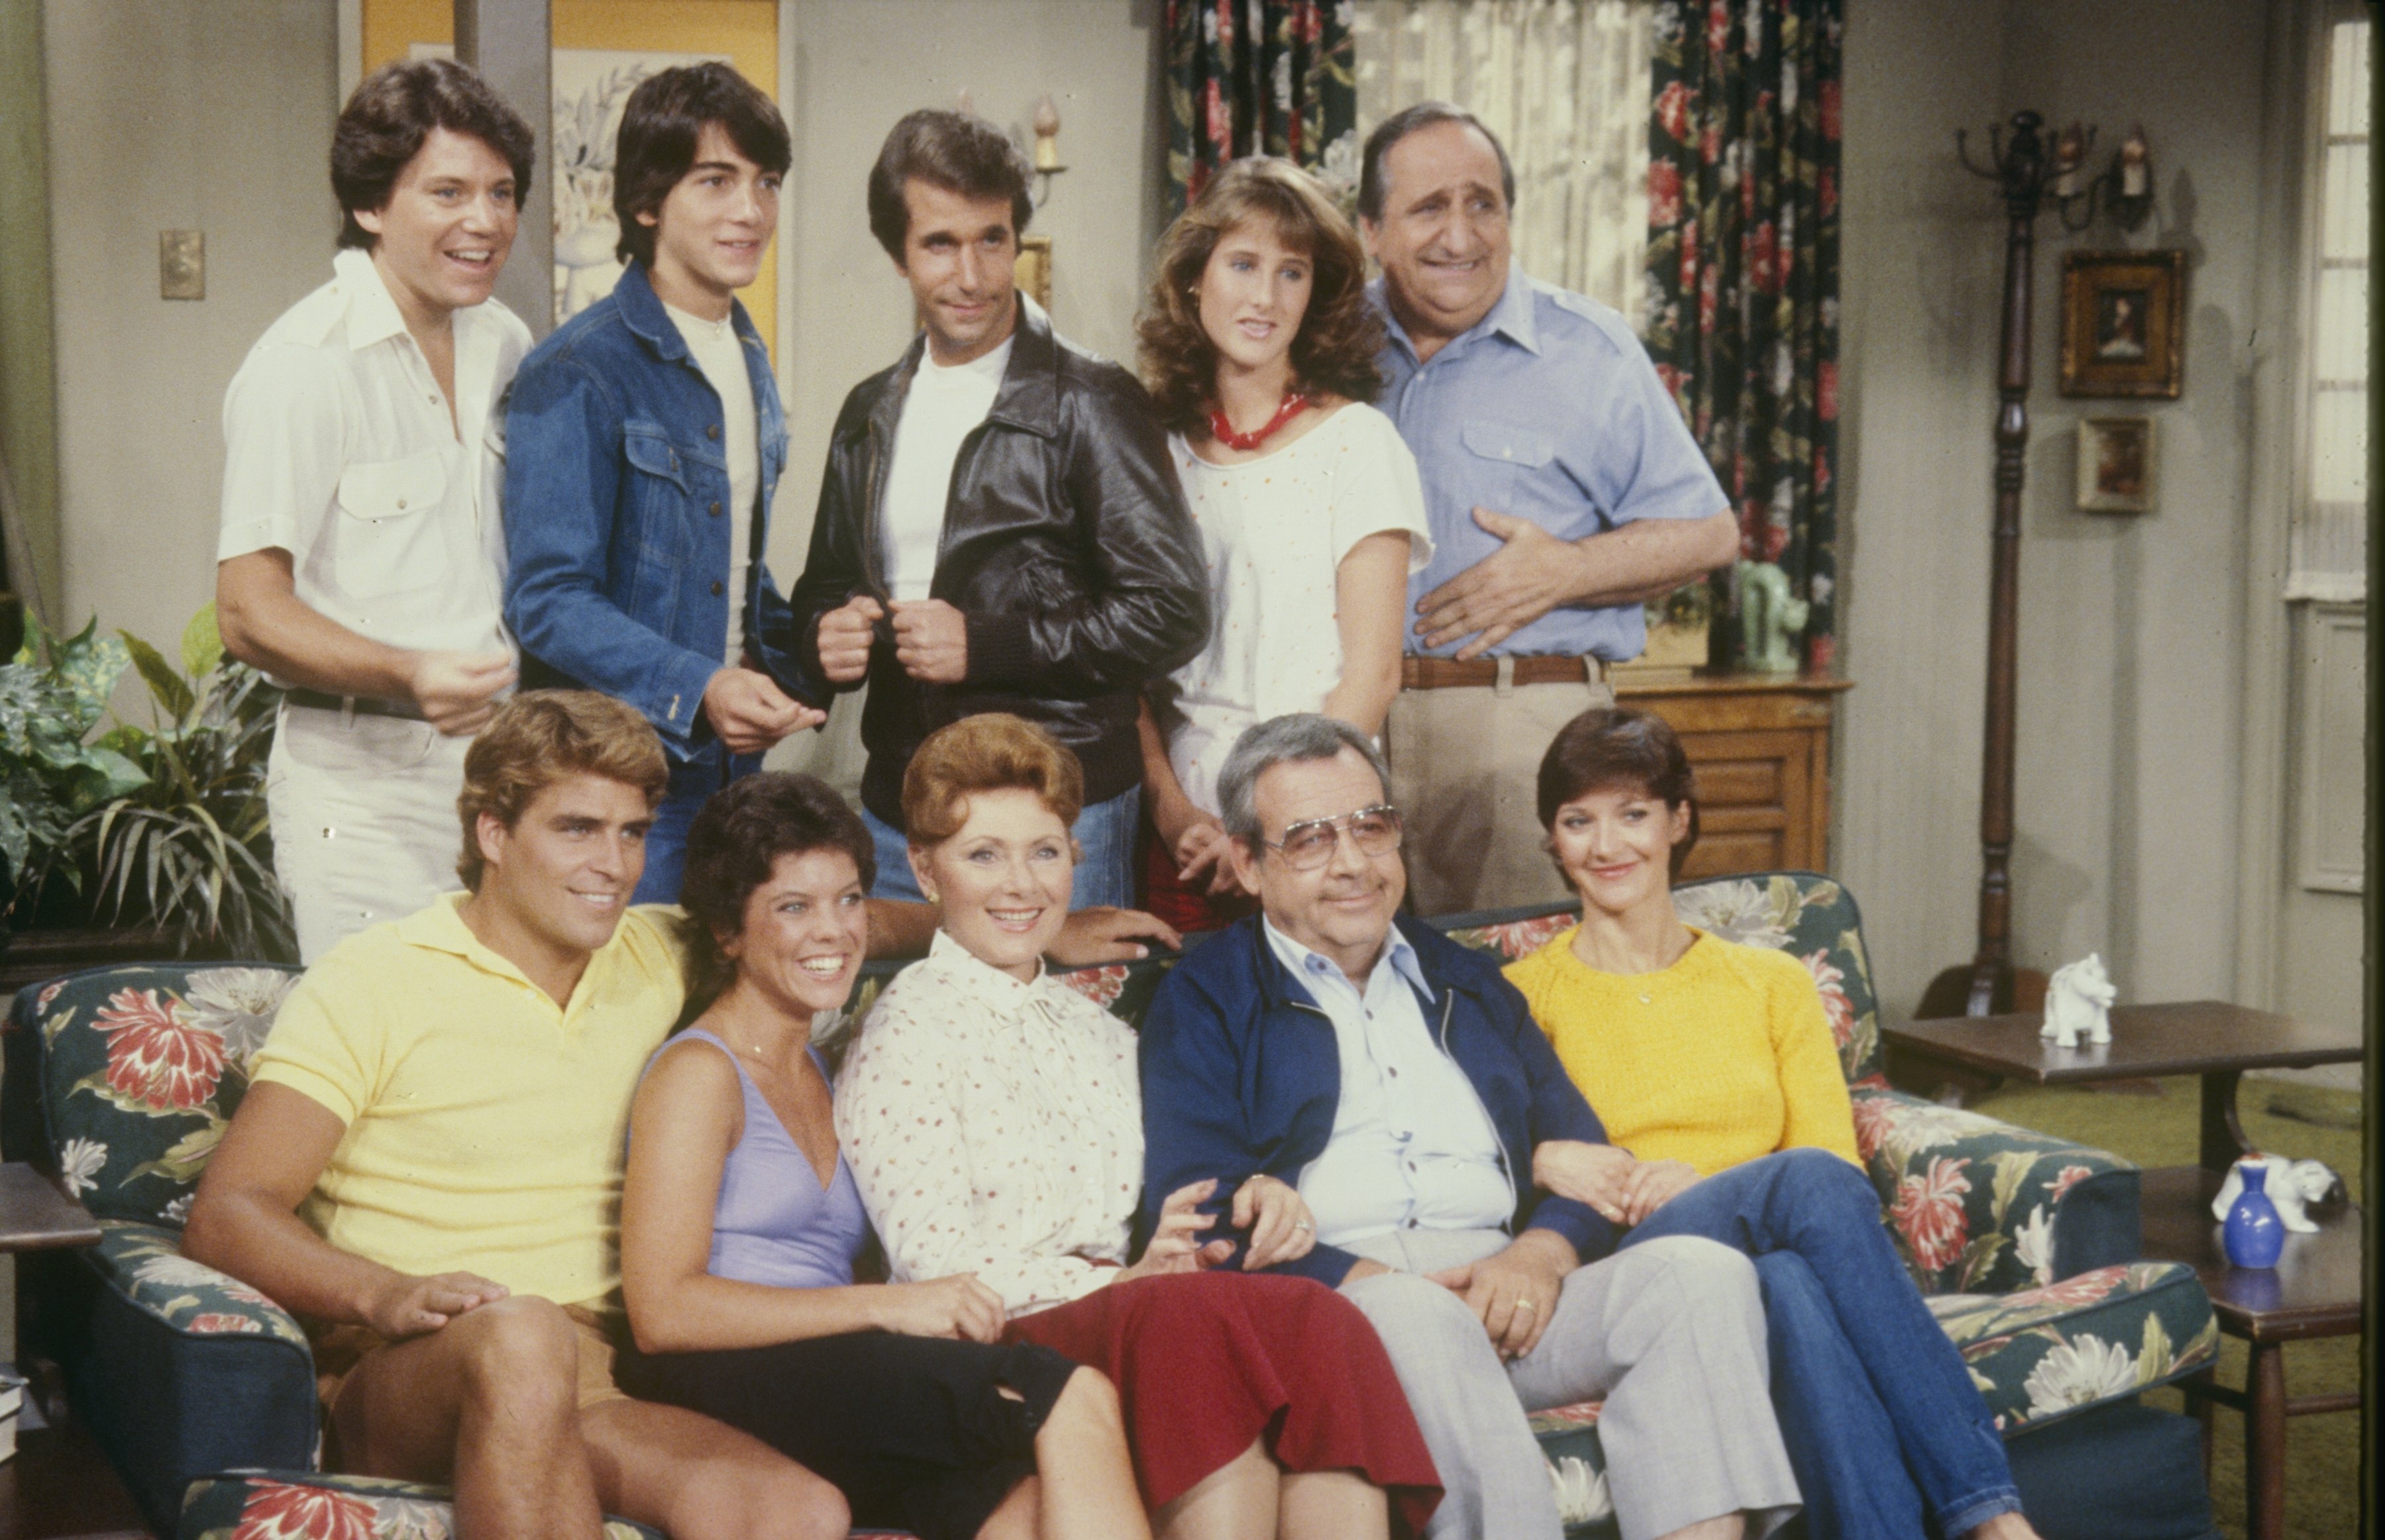 The "Happy Days" cast members Anson Williams, Scott Baio, Henry Winkler, Cathy Silvers, Al Molinaro,(Top, L-R) Ted McGinley, Erin Moran, Marion Ross, Tom Bosley, and Lynda Goodfriend (Bottom, L-R) | Source: Getty Images